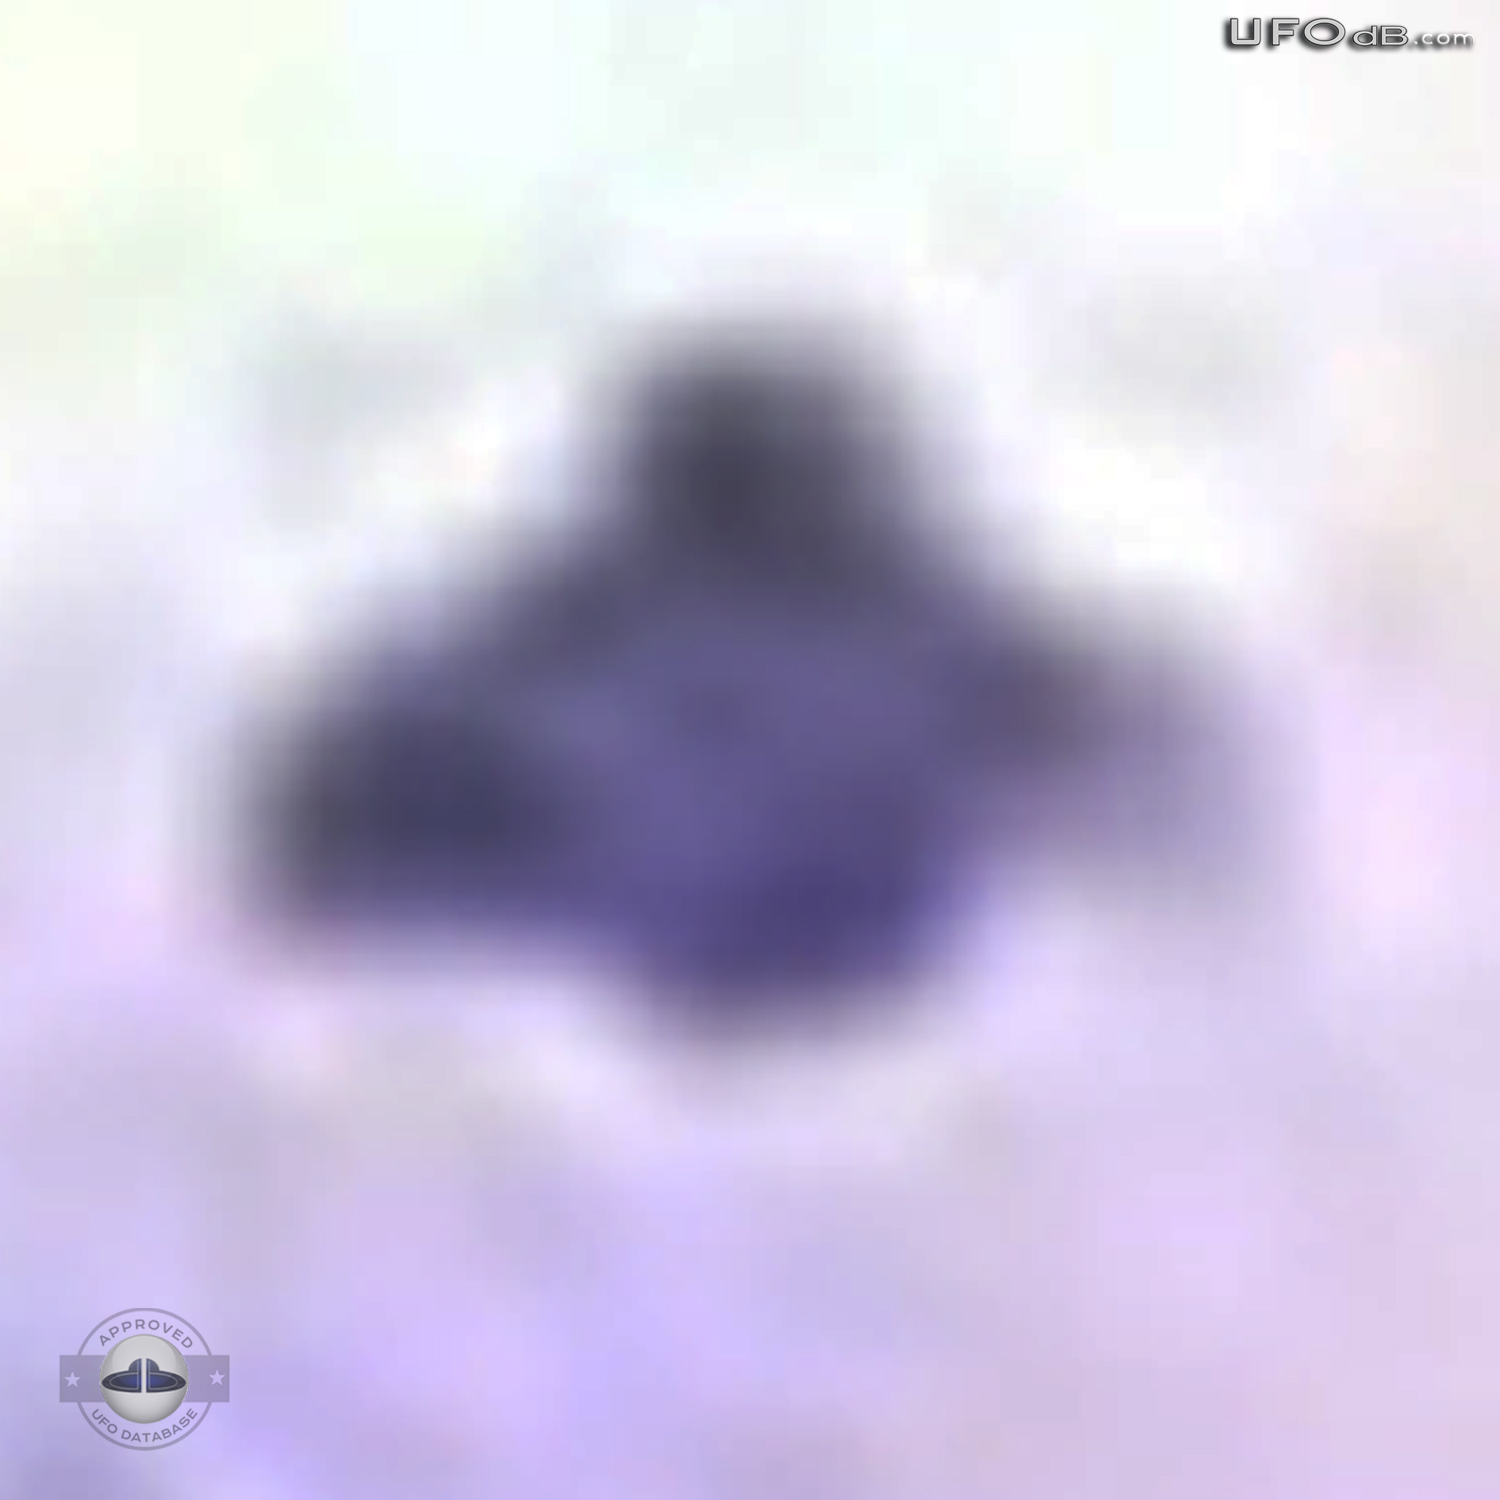 Australian Gold prospector capture UFO on picture in New South Wales UFO Picture #354-5